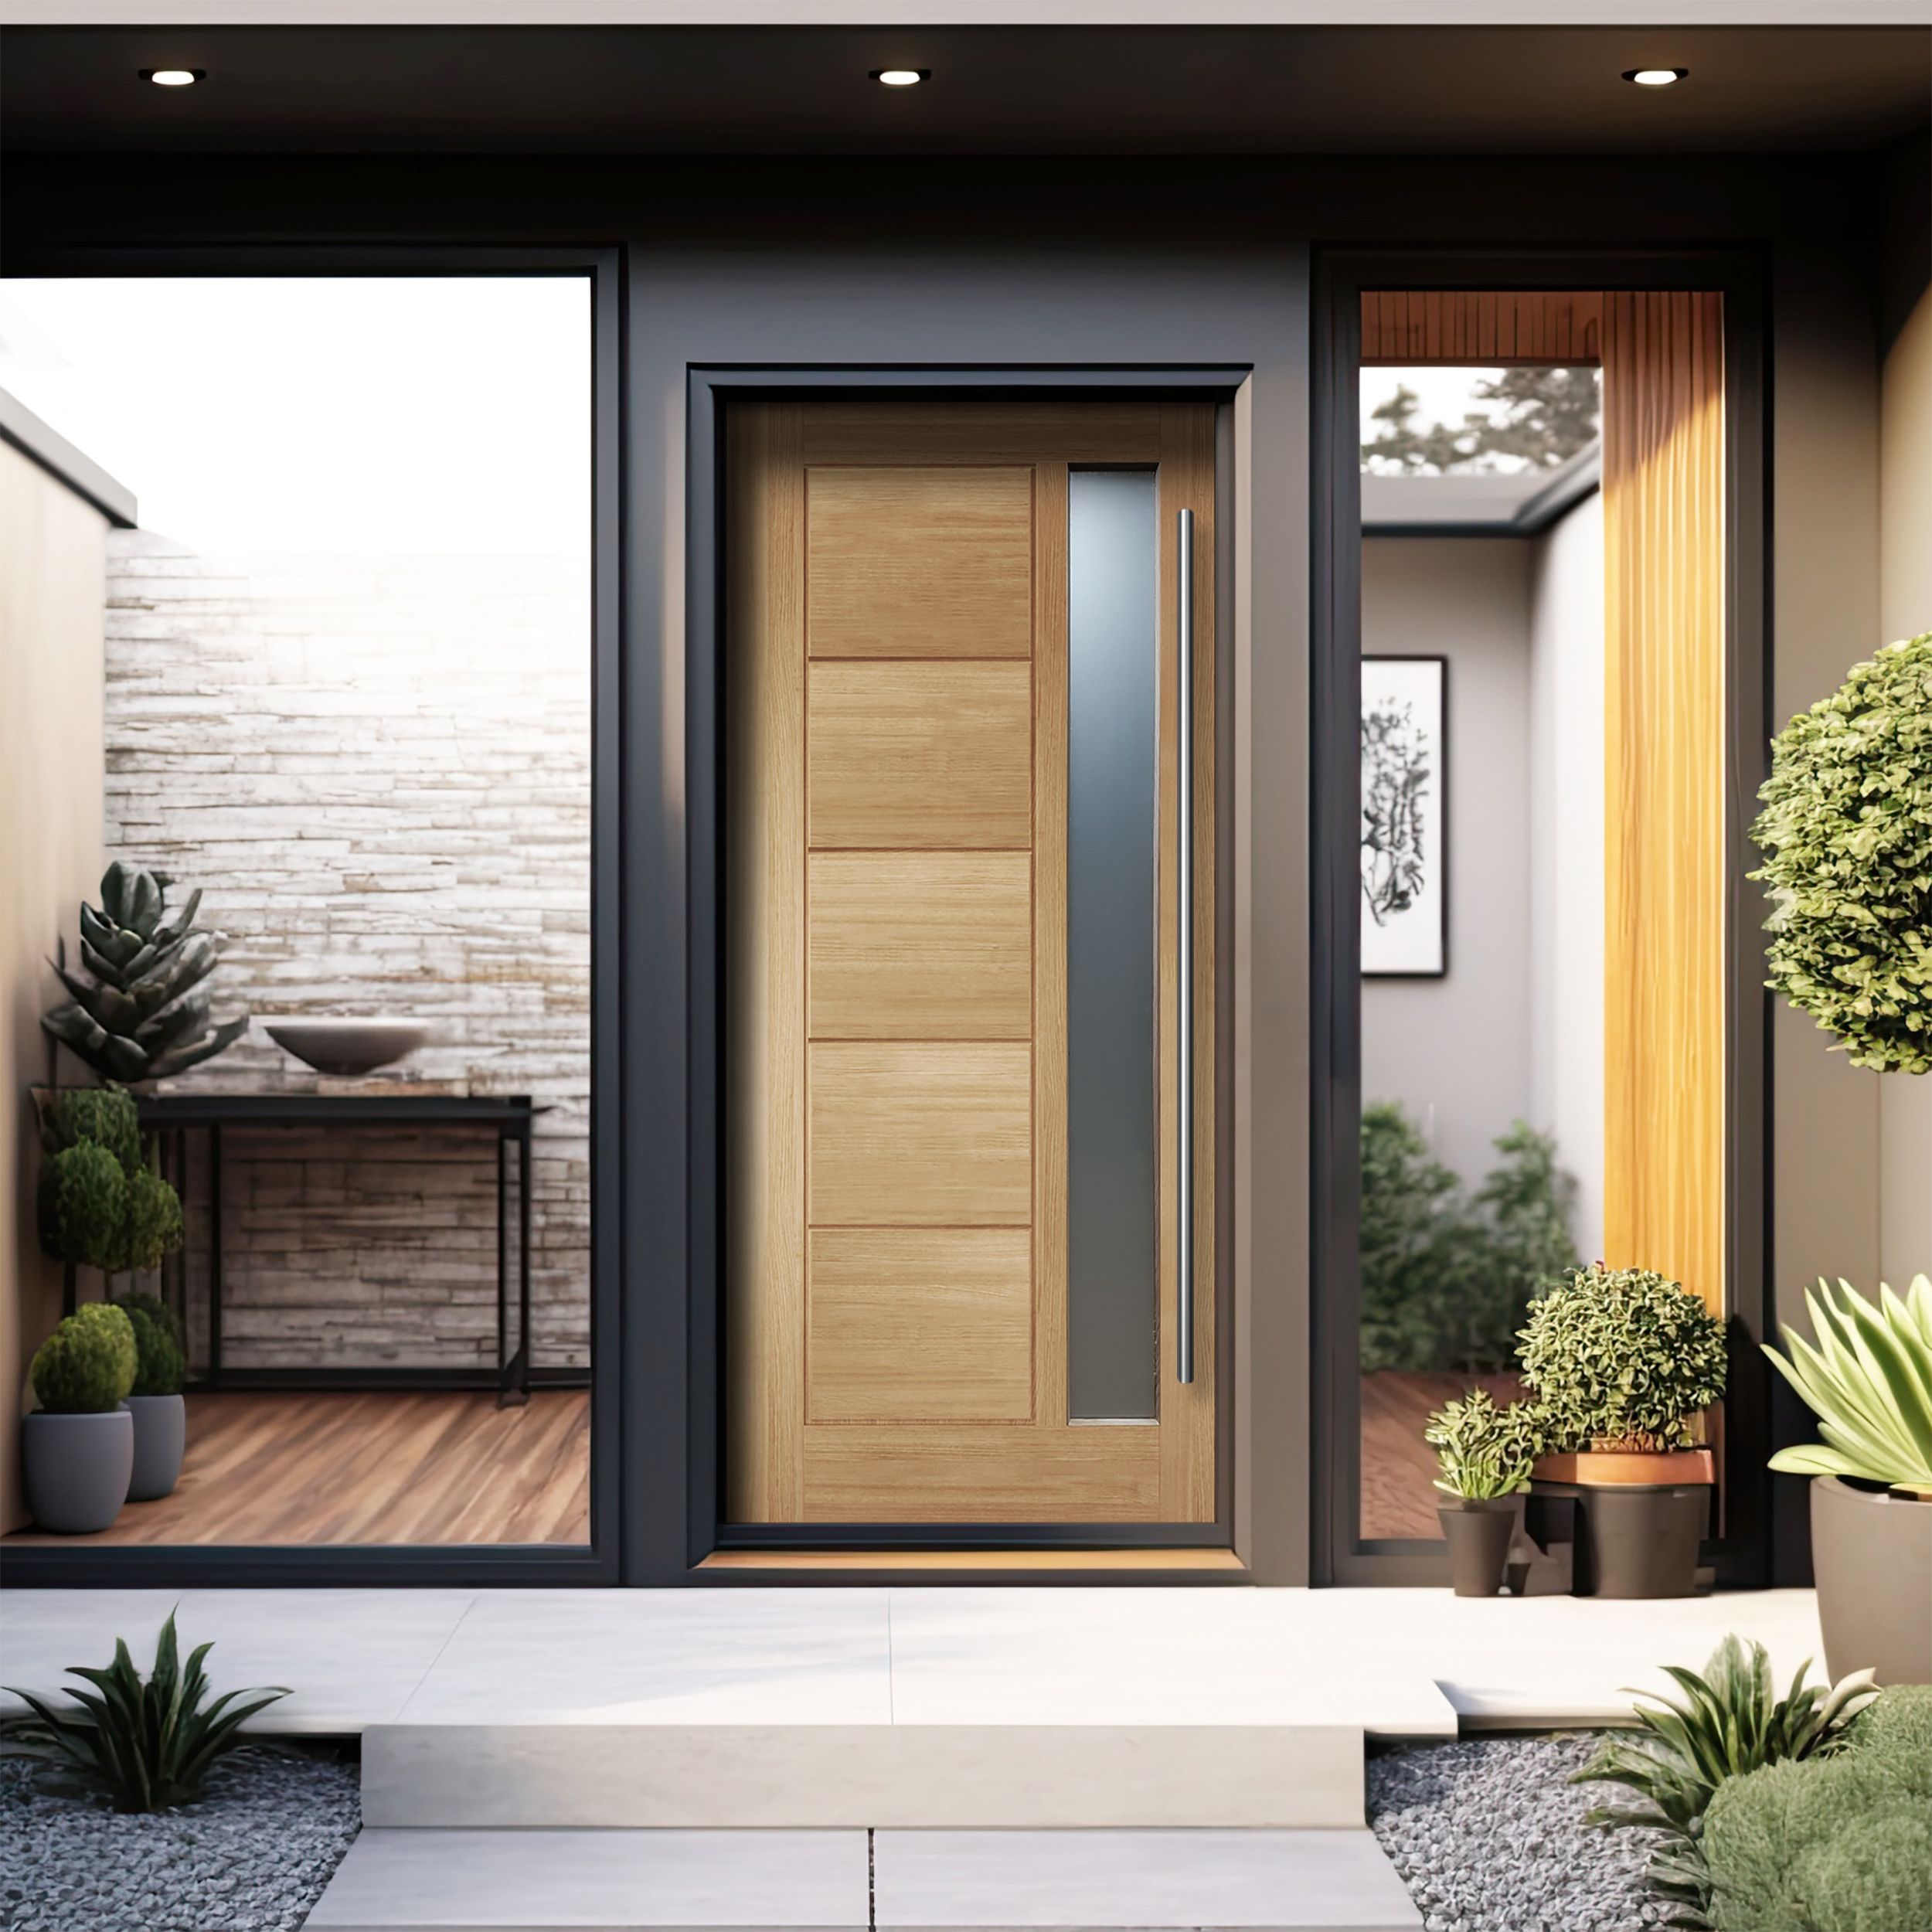 Linear 5 panel Frosted glass Obscure Timber White oak veneer Swinging External Front Door, (H)2032mm (W)813mm